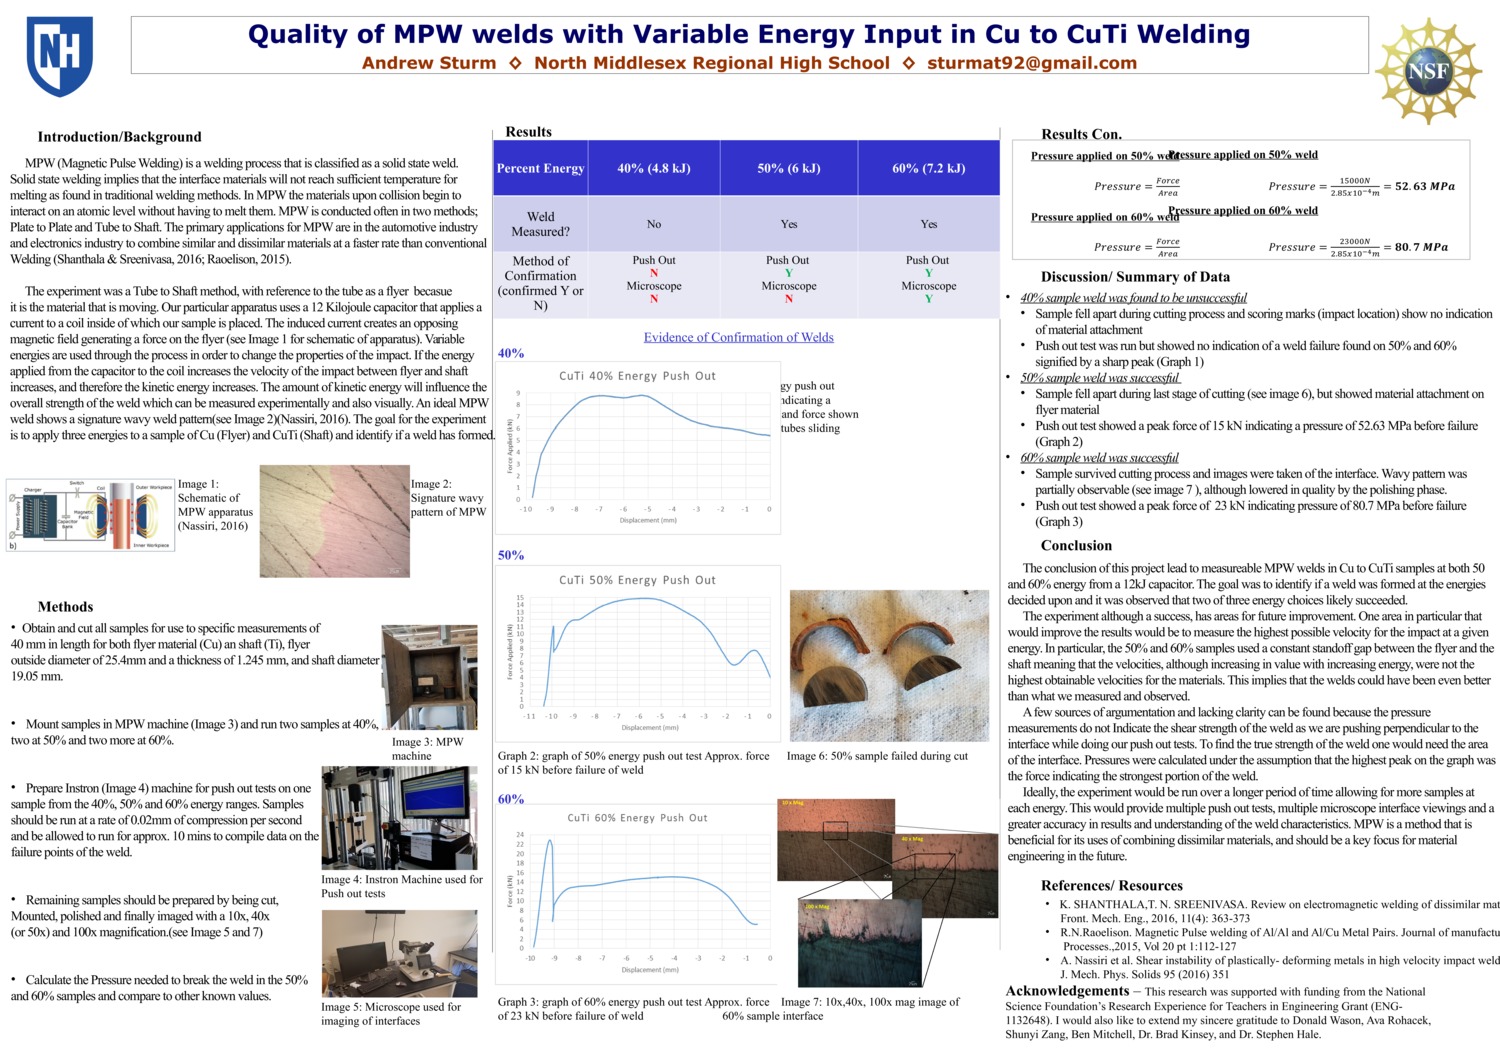 Quality Of Mpw Welds With Variable Energy Input In Cu To Cuti Welding by sturmat92